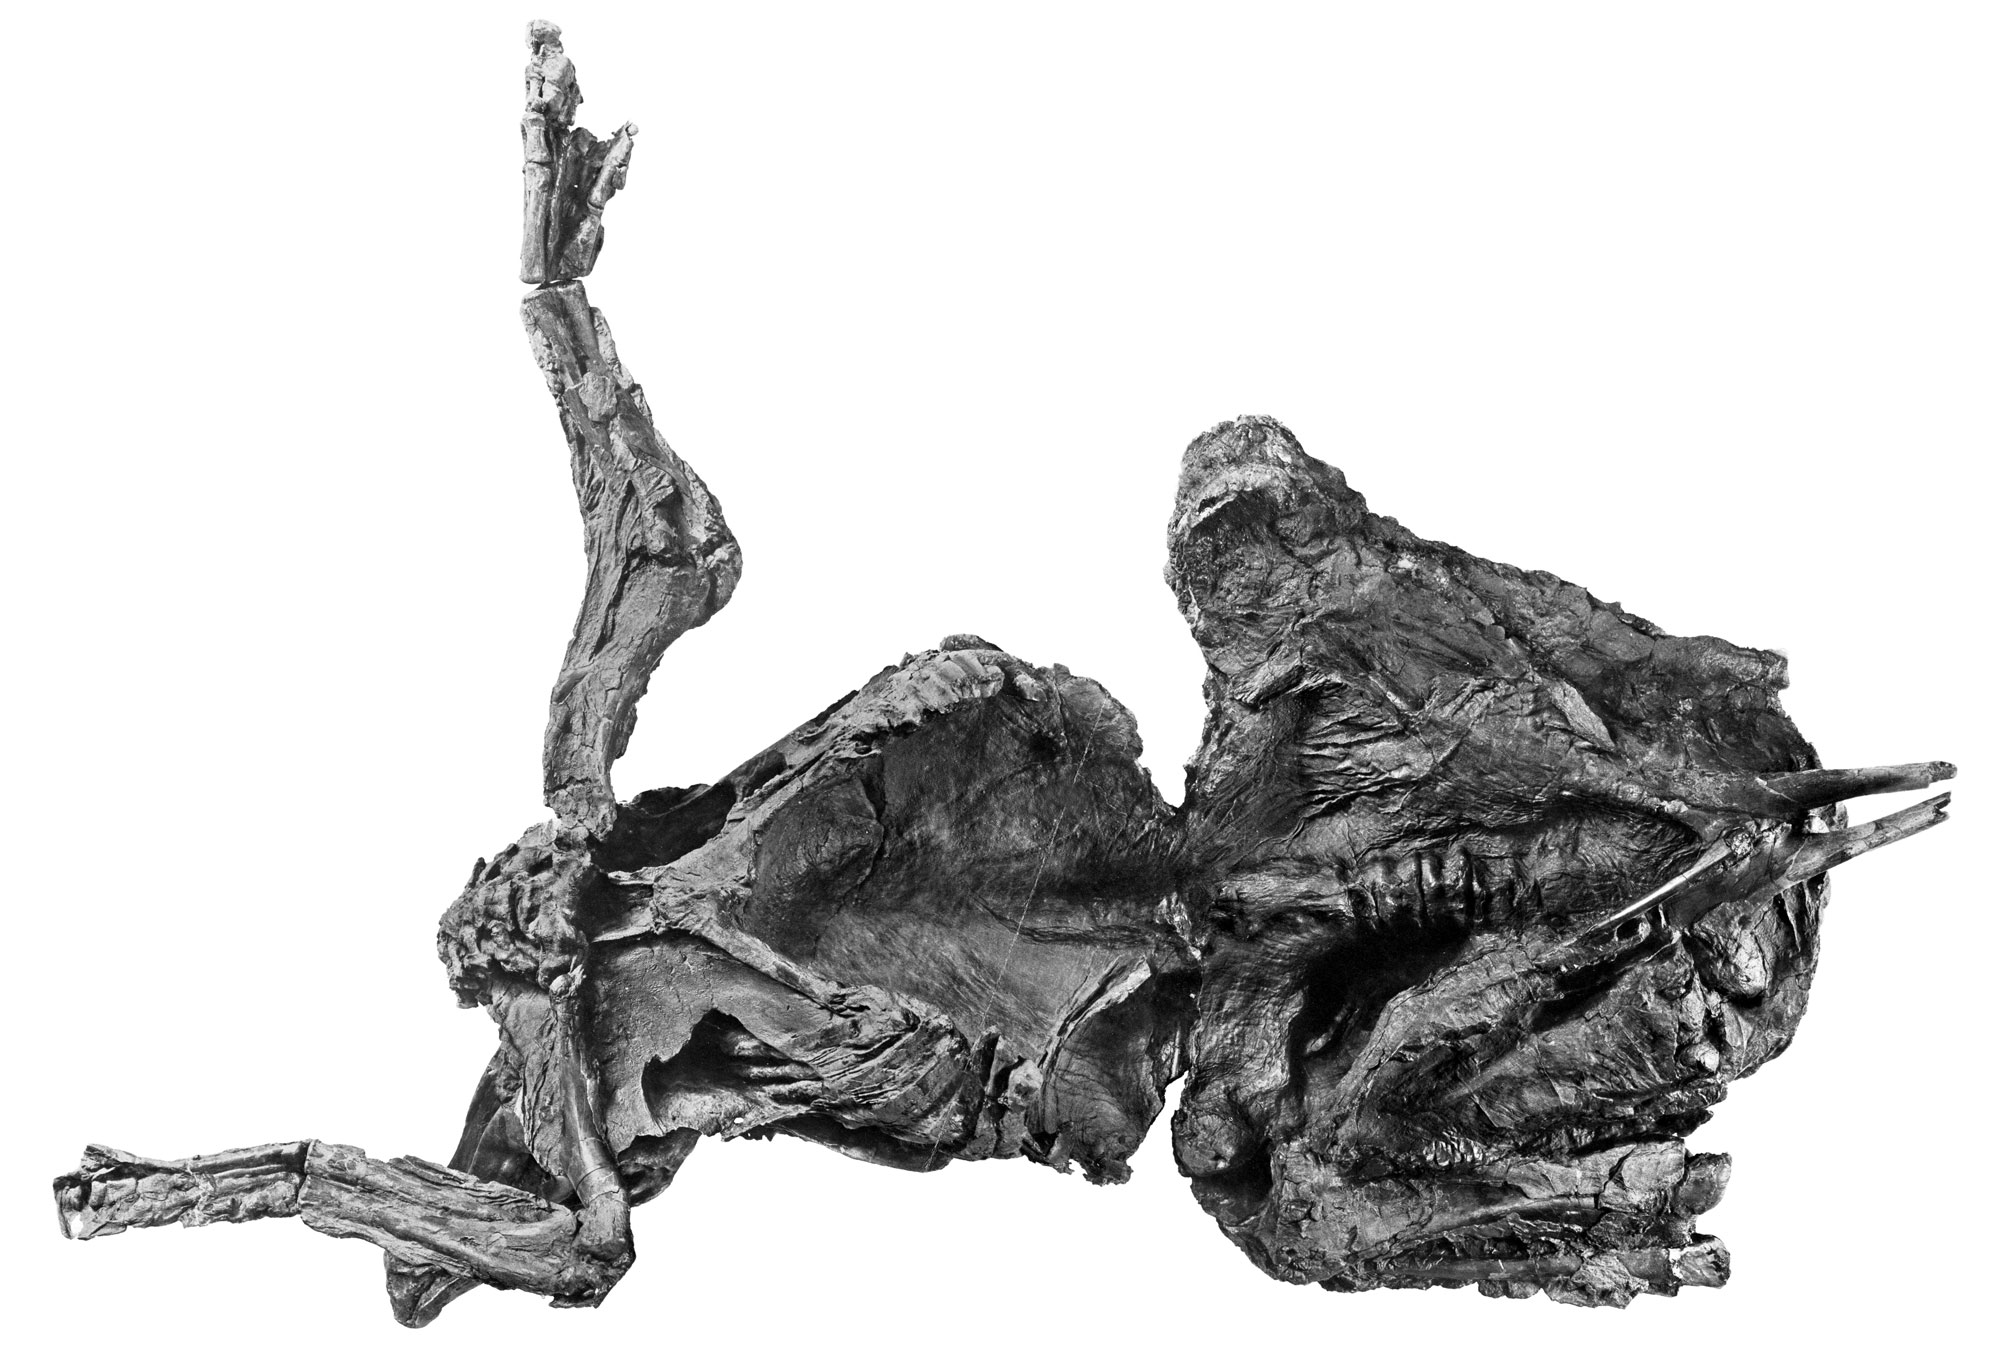 Black and white photograph of a mummy of the duck-billed dinosaur Edmontosaurus annectens from the Late Cretaceous of Wyoming. The photo shows a dinosaur on its back. One forelimb is bent forward at a 90-degree angle at the elbow; the other is extended straight out to the side. The hind legs are not fully preserved. Nearly the whole specimen appears to be covered with a layer of fossilized soft tissue.